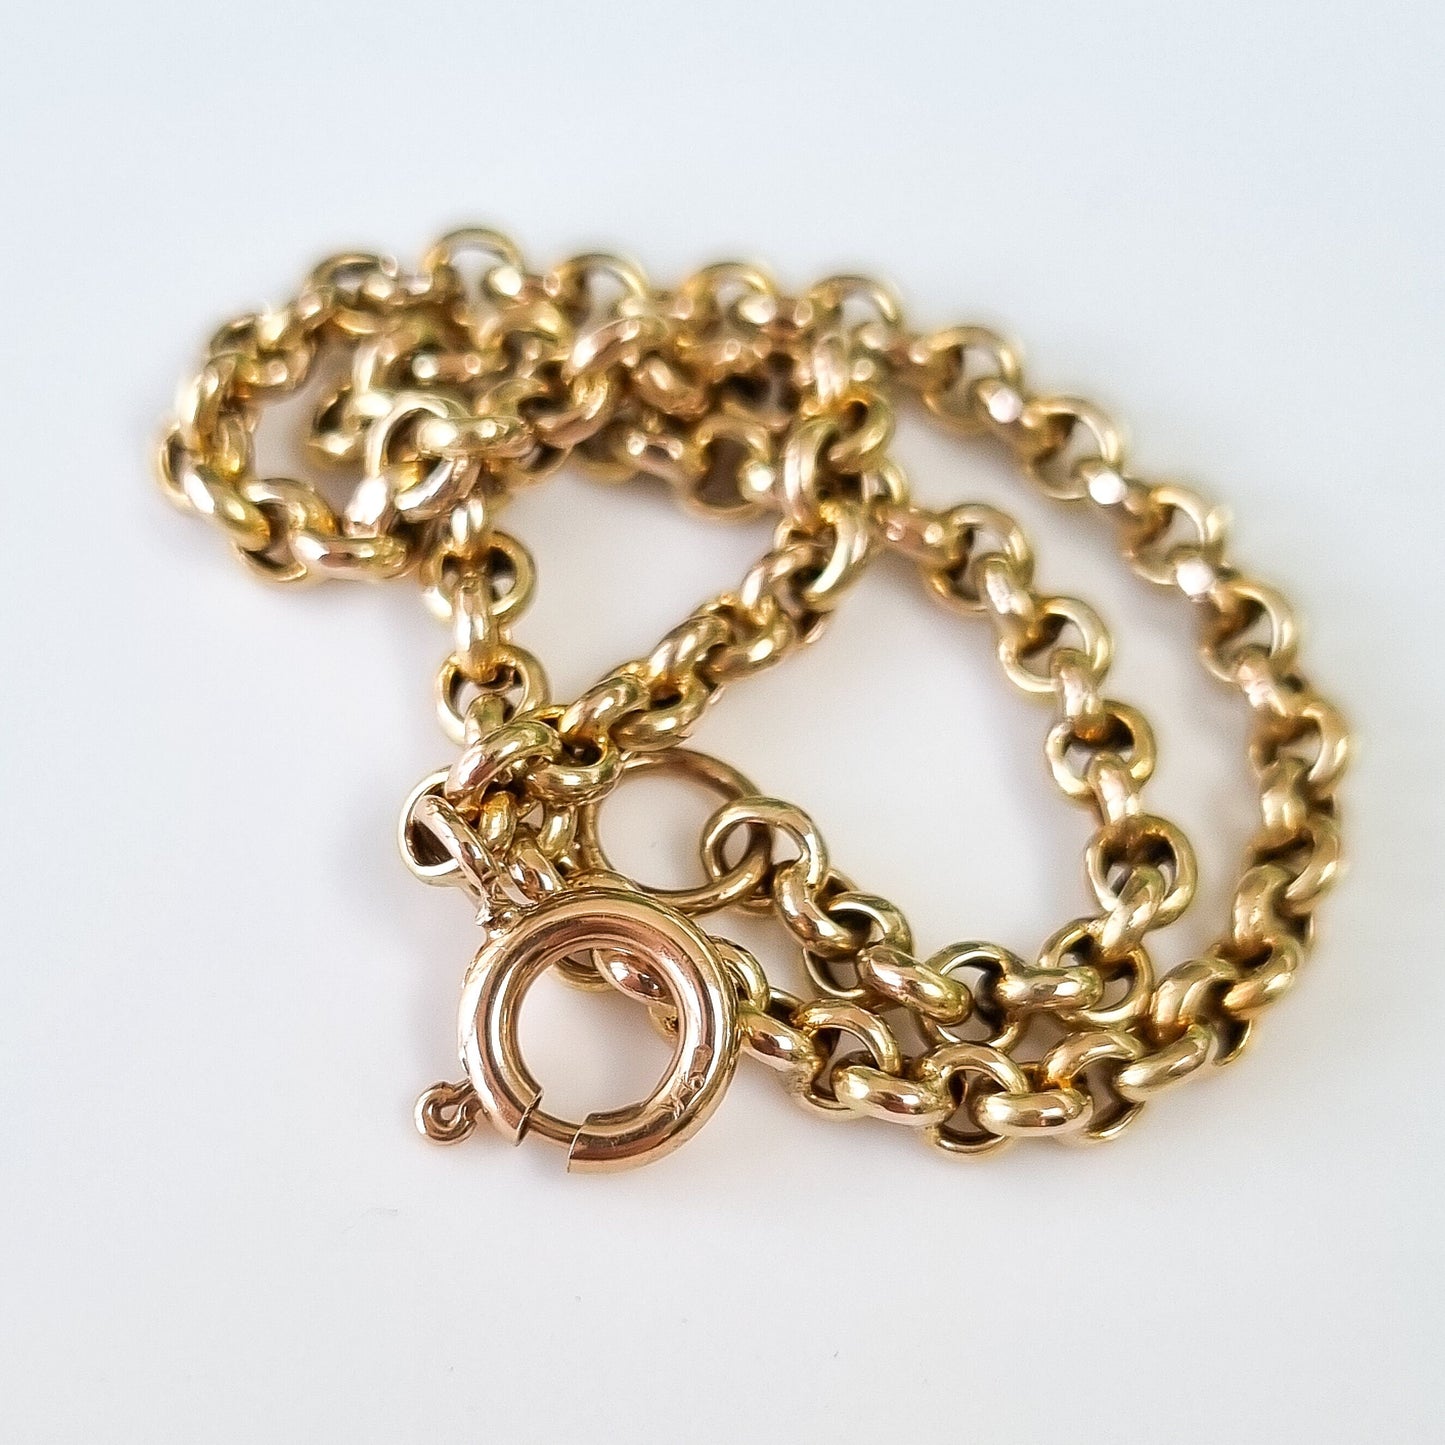 Vintage Solid 9ct Yellow Gold Rolo Link Bracelet